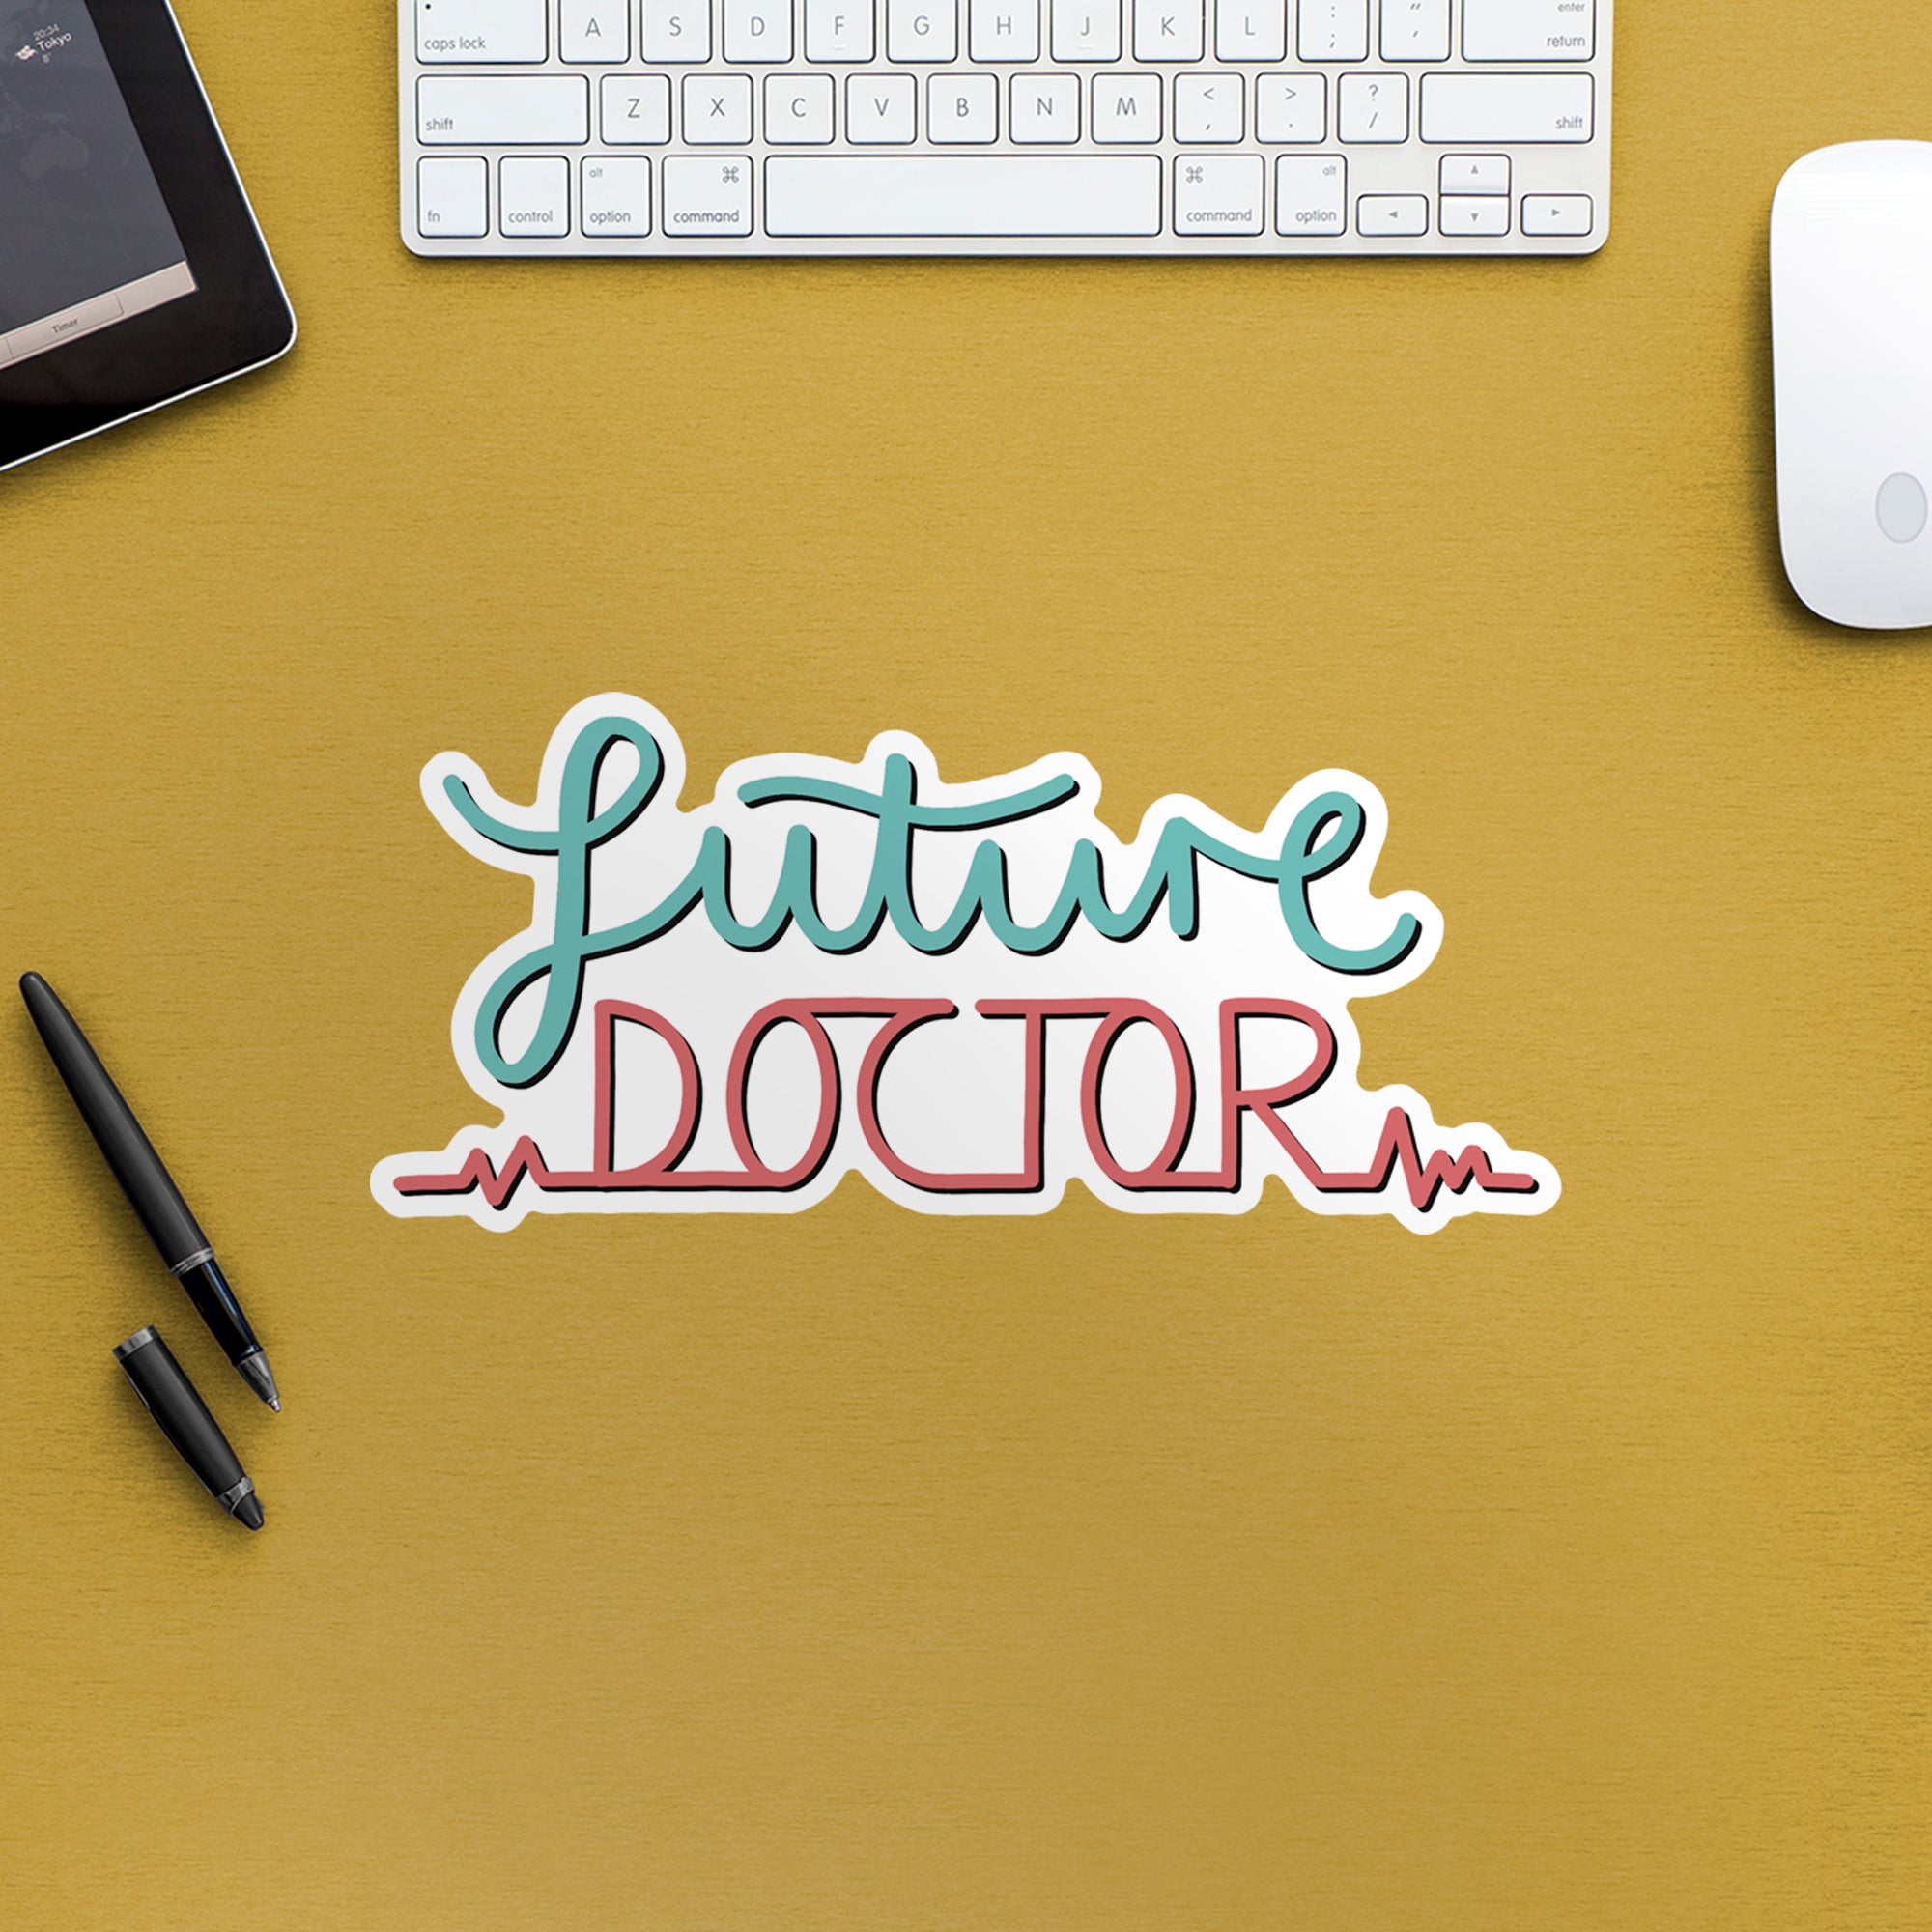 Future Doctor - Officially Licensed Big Moods Removable Wall Decal Large by Fathead | Vinyl